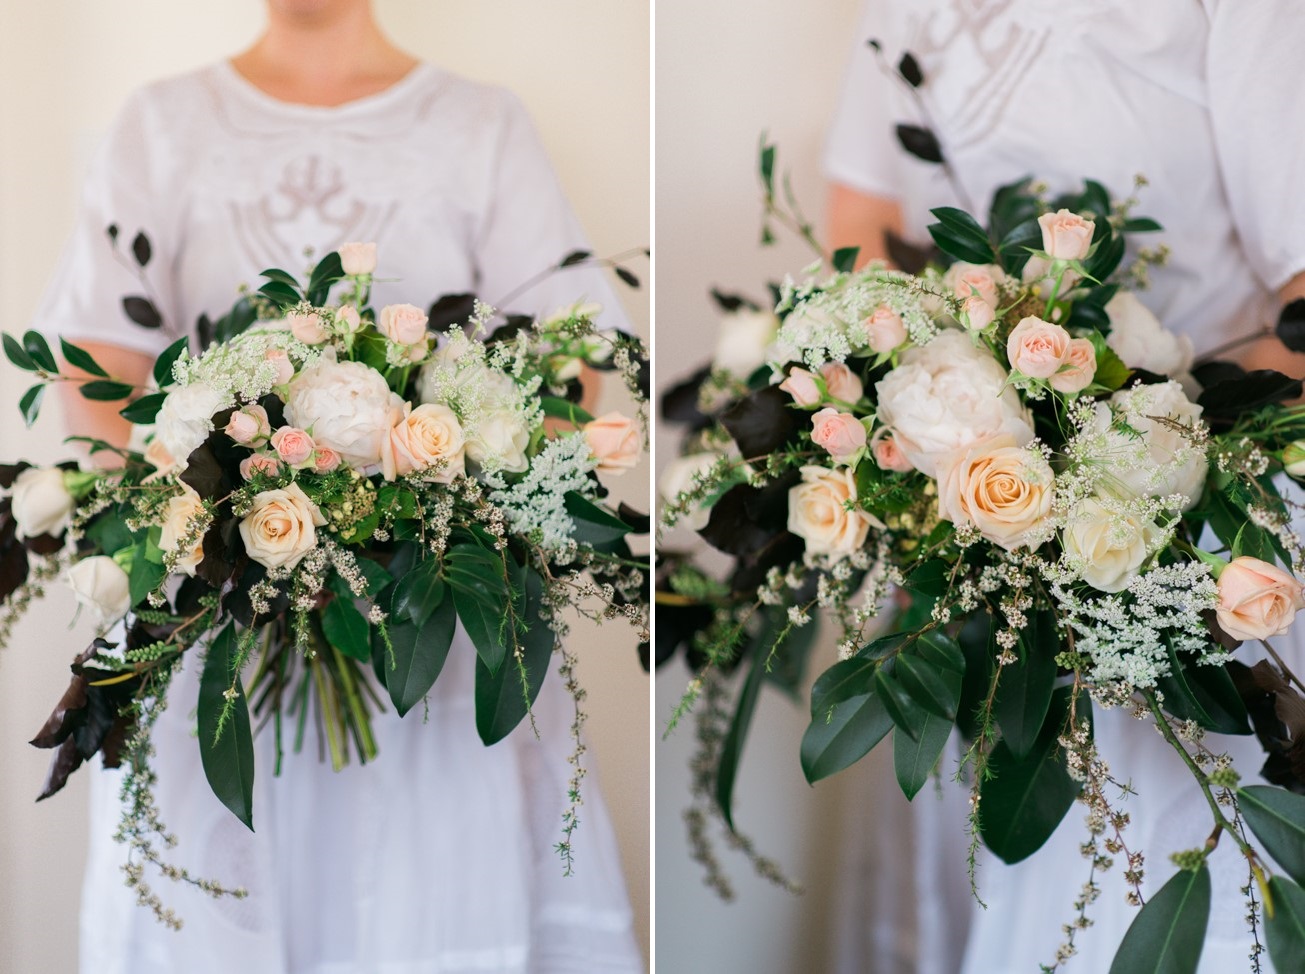 A Beautiful Vintage-Inspired Bridal Bouquet of Roses & Peonies